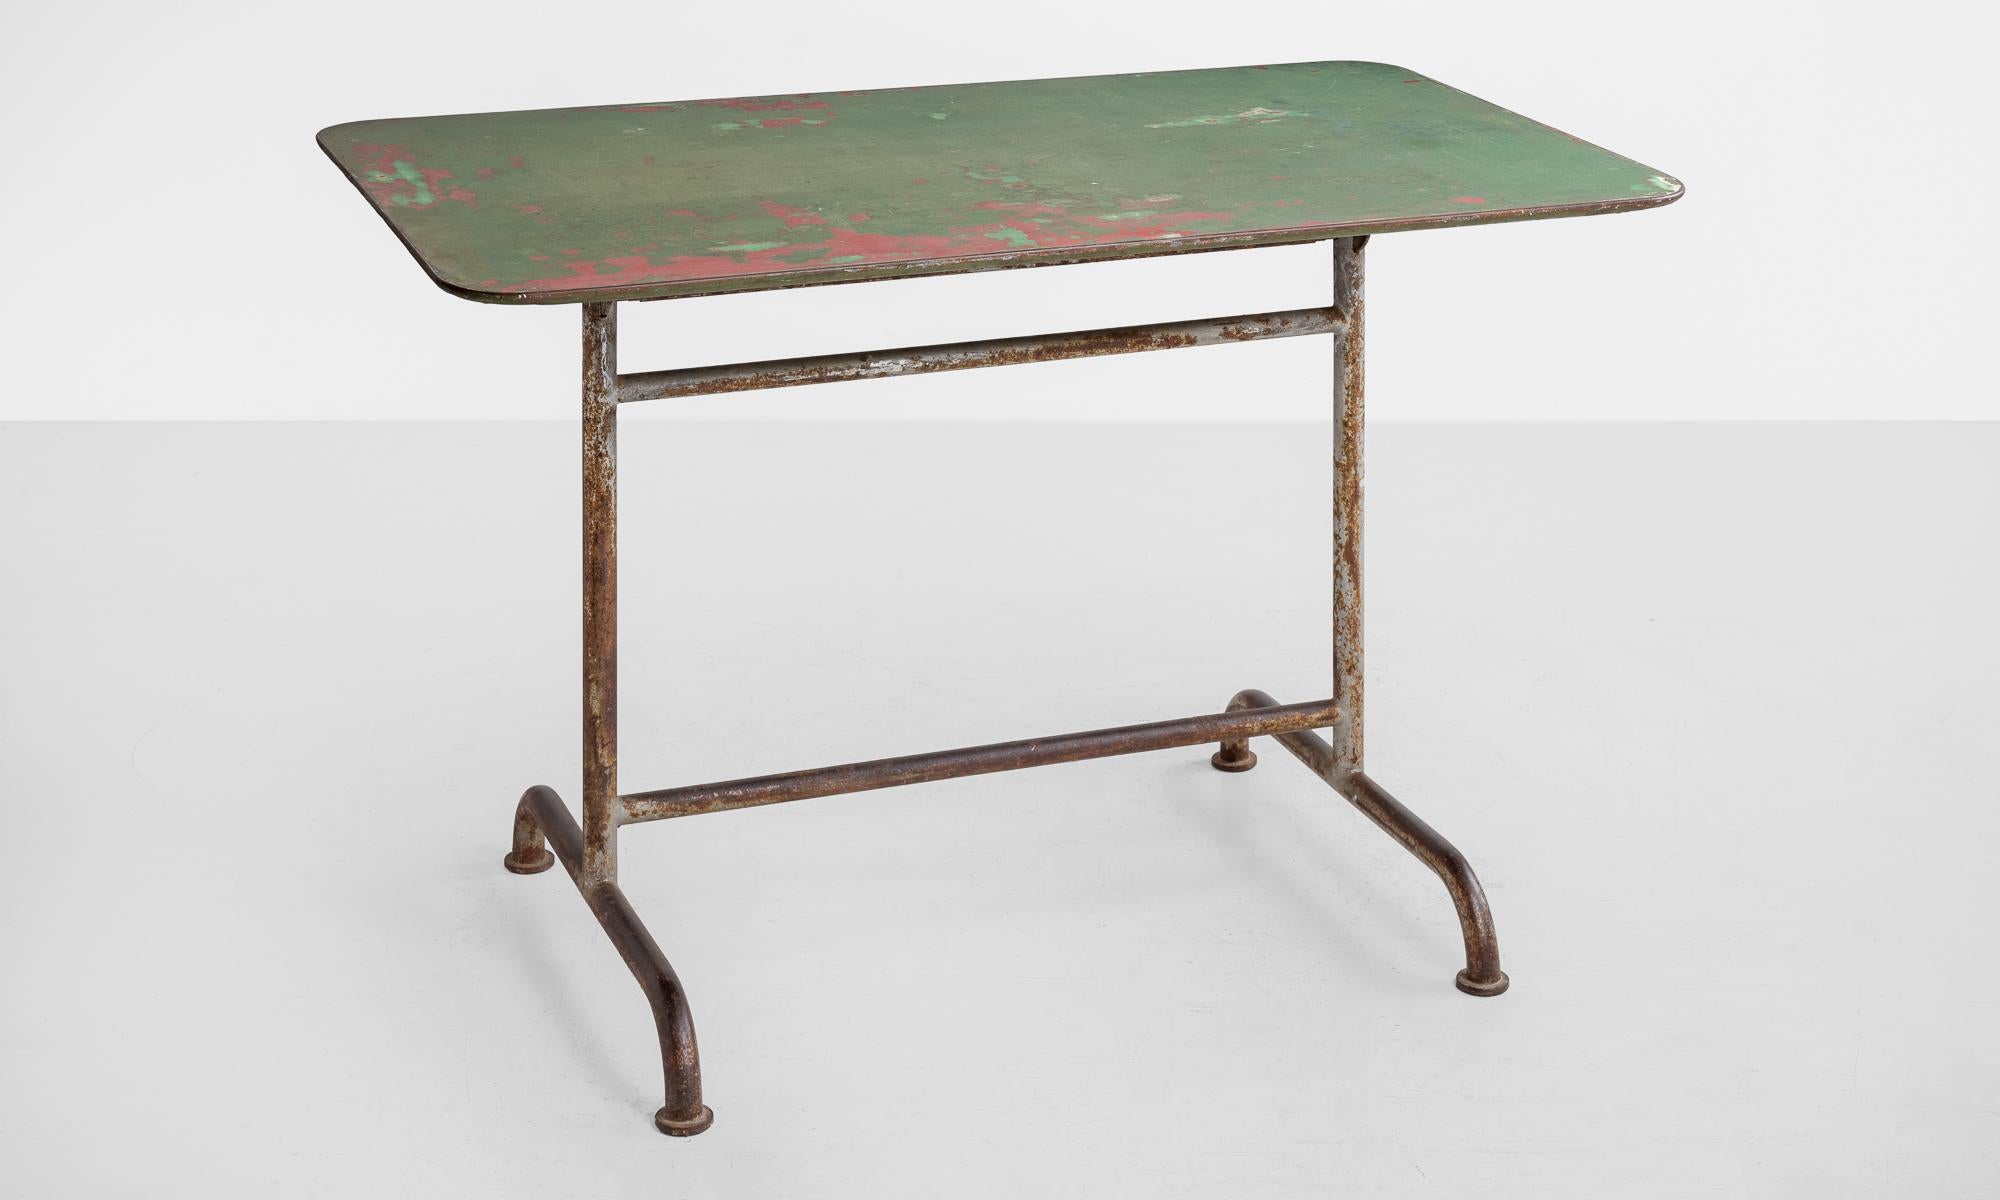 Iron Garden Table, America, circa 1920

Simple form, fold down factory table in original green paint.